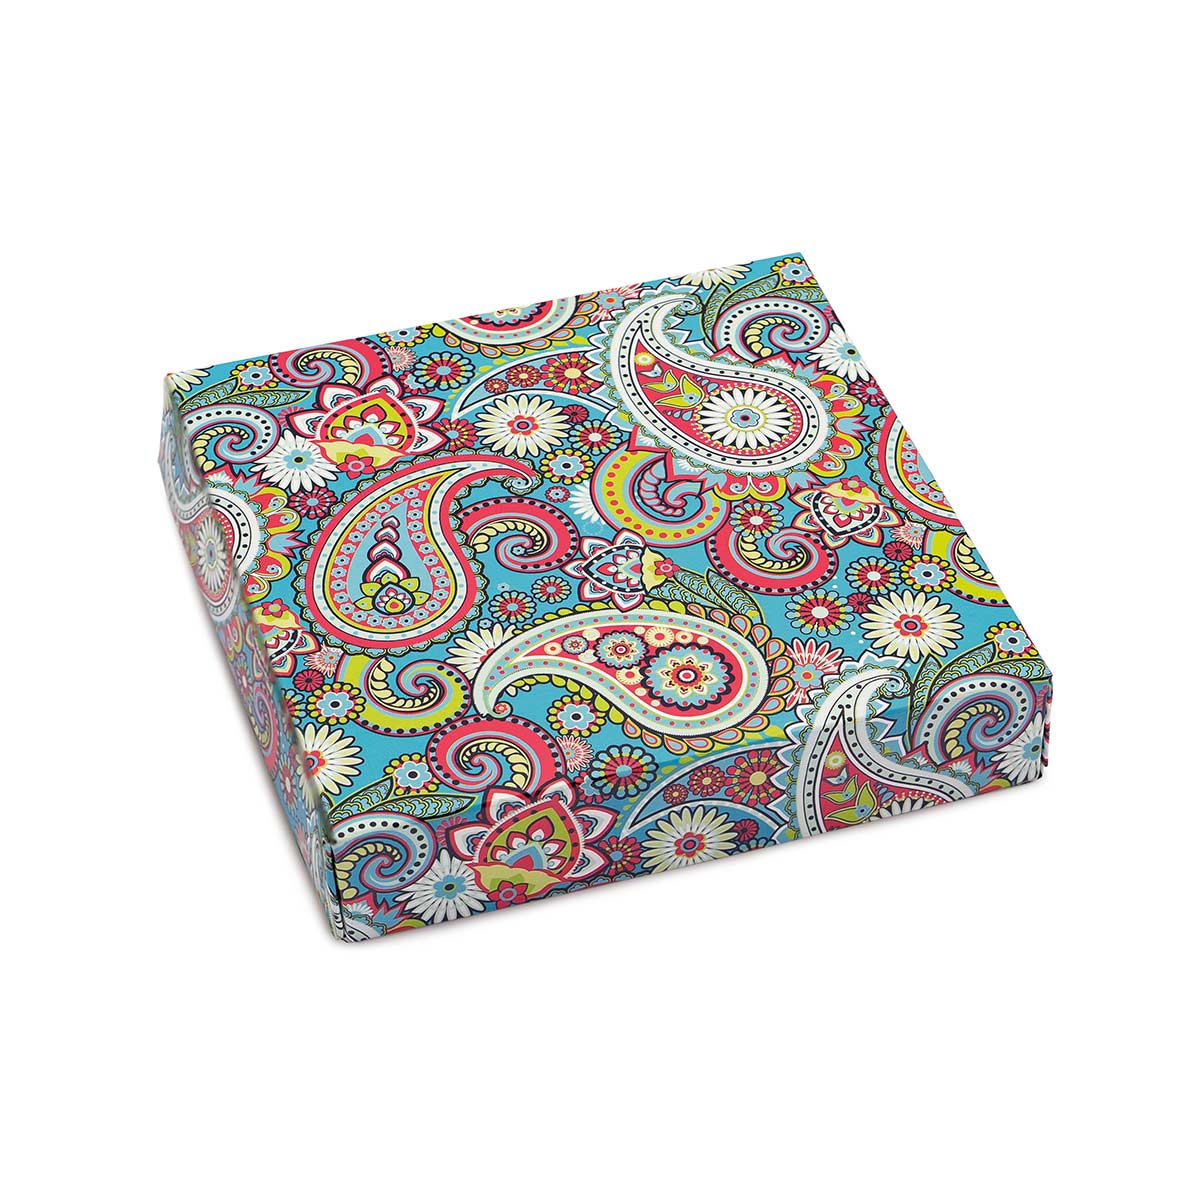 Bright Paisley Themed Box Cover for 9 Piece Holiday Assortment